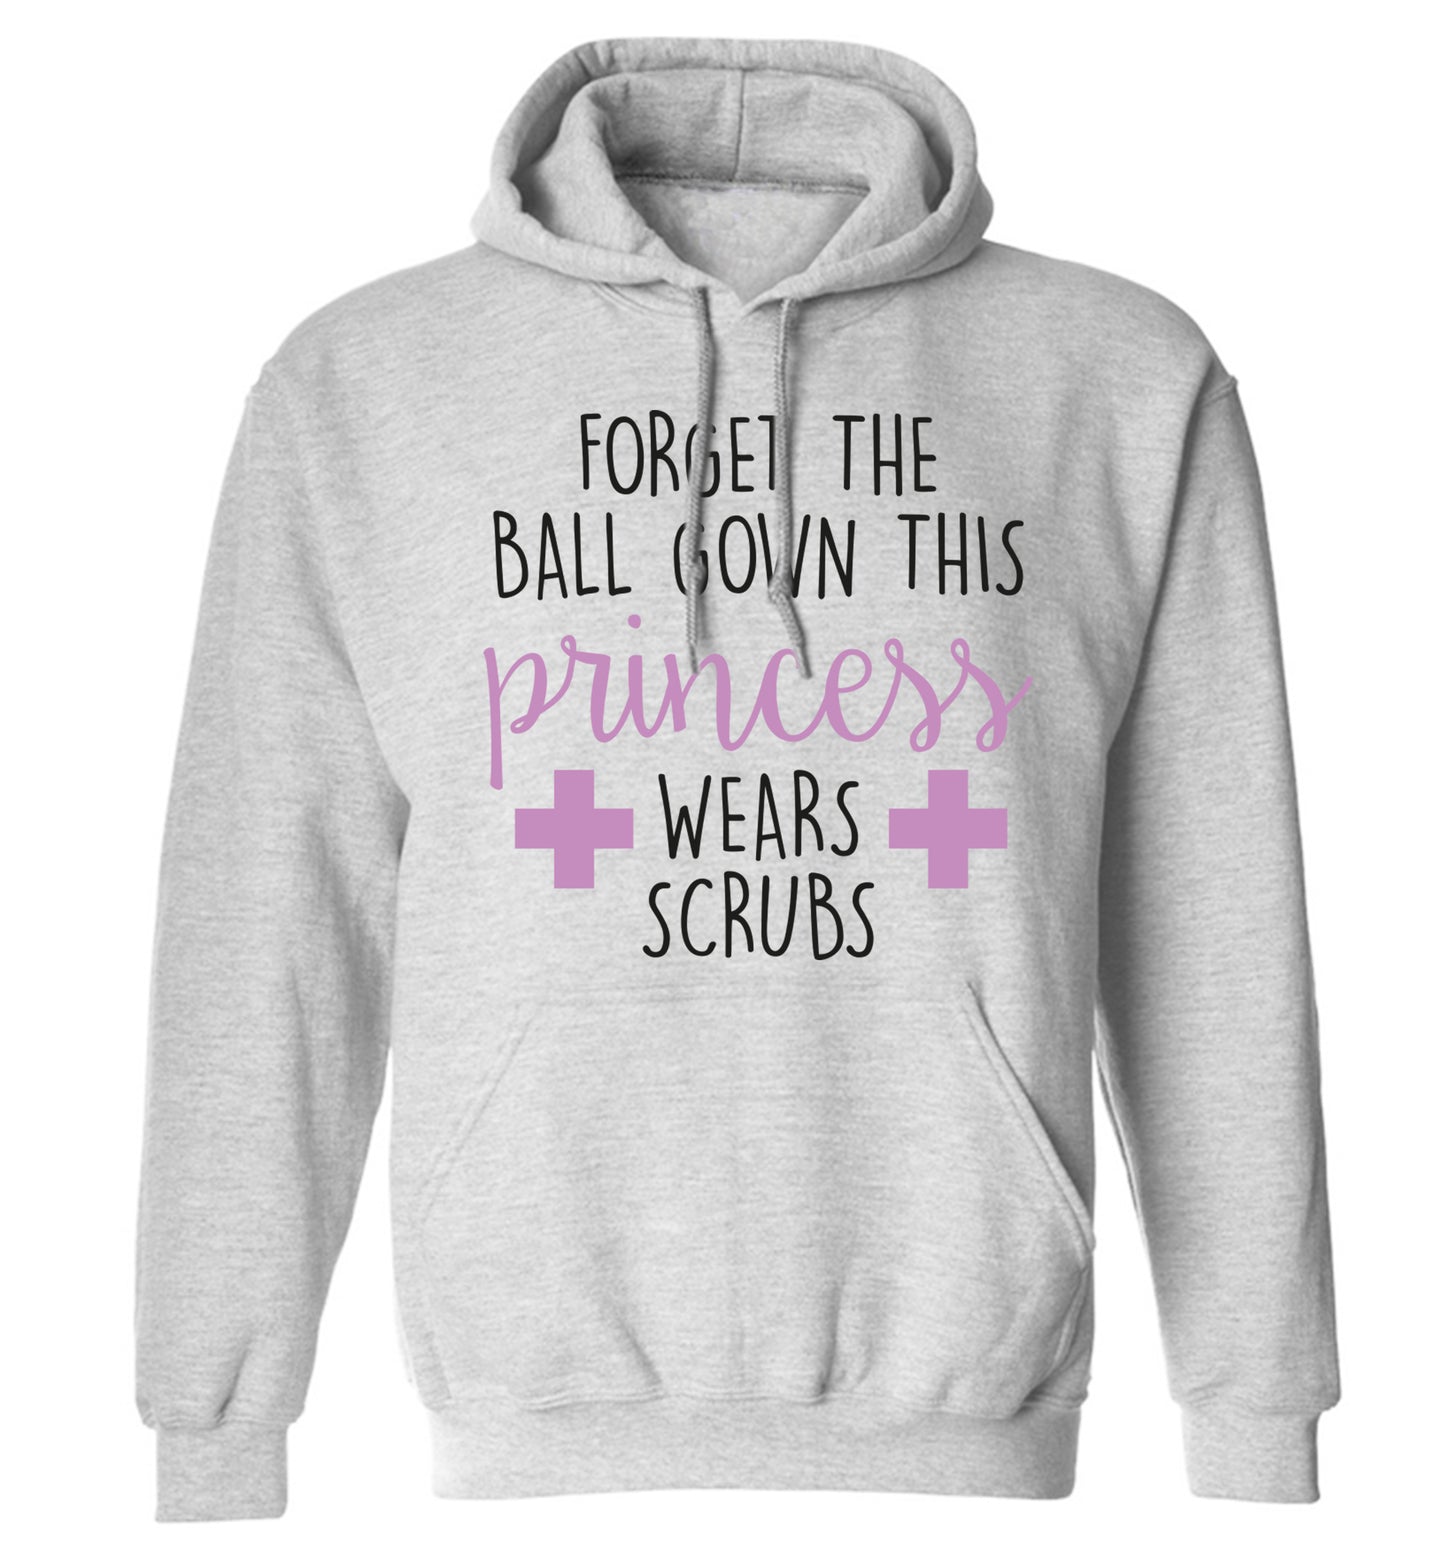 Forget the ball gown this princess wears scrubs adults unisex grey hoodie 2XL